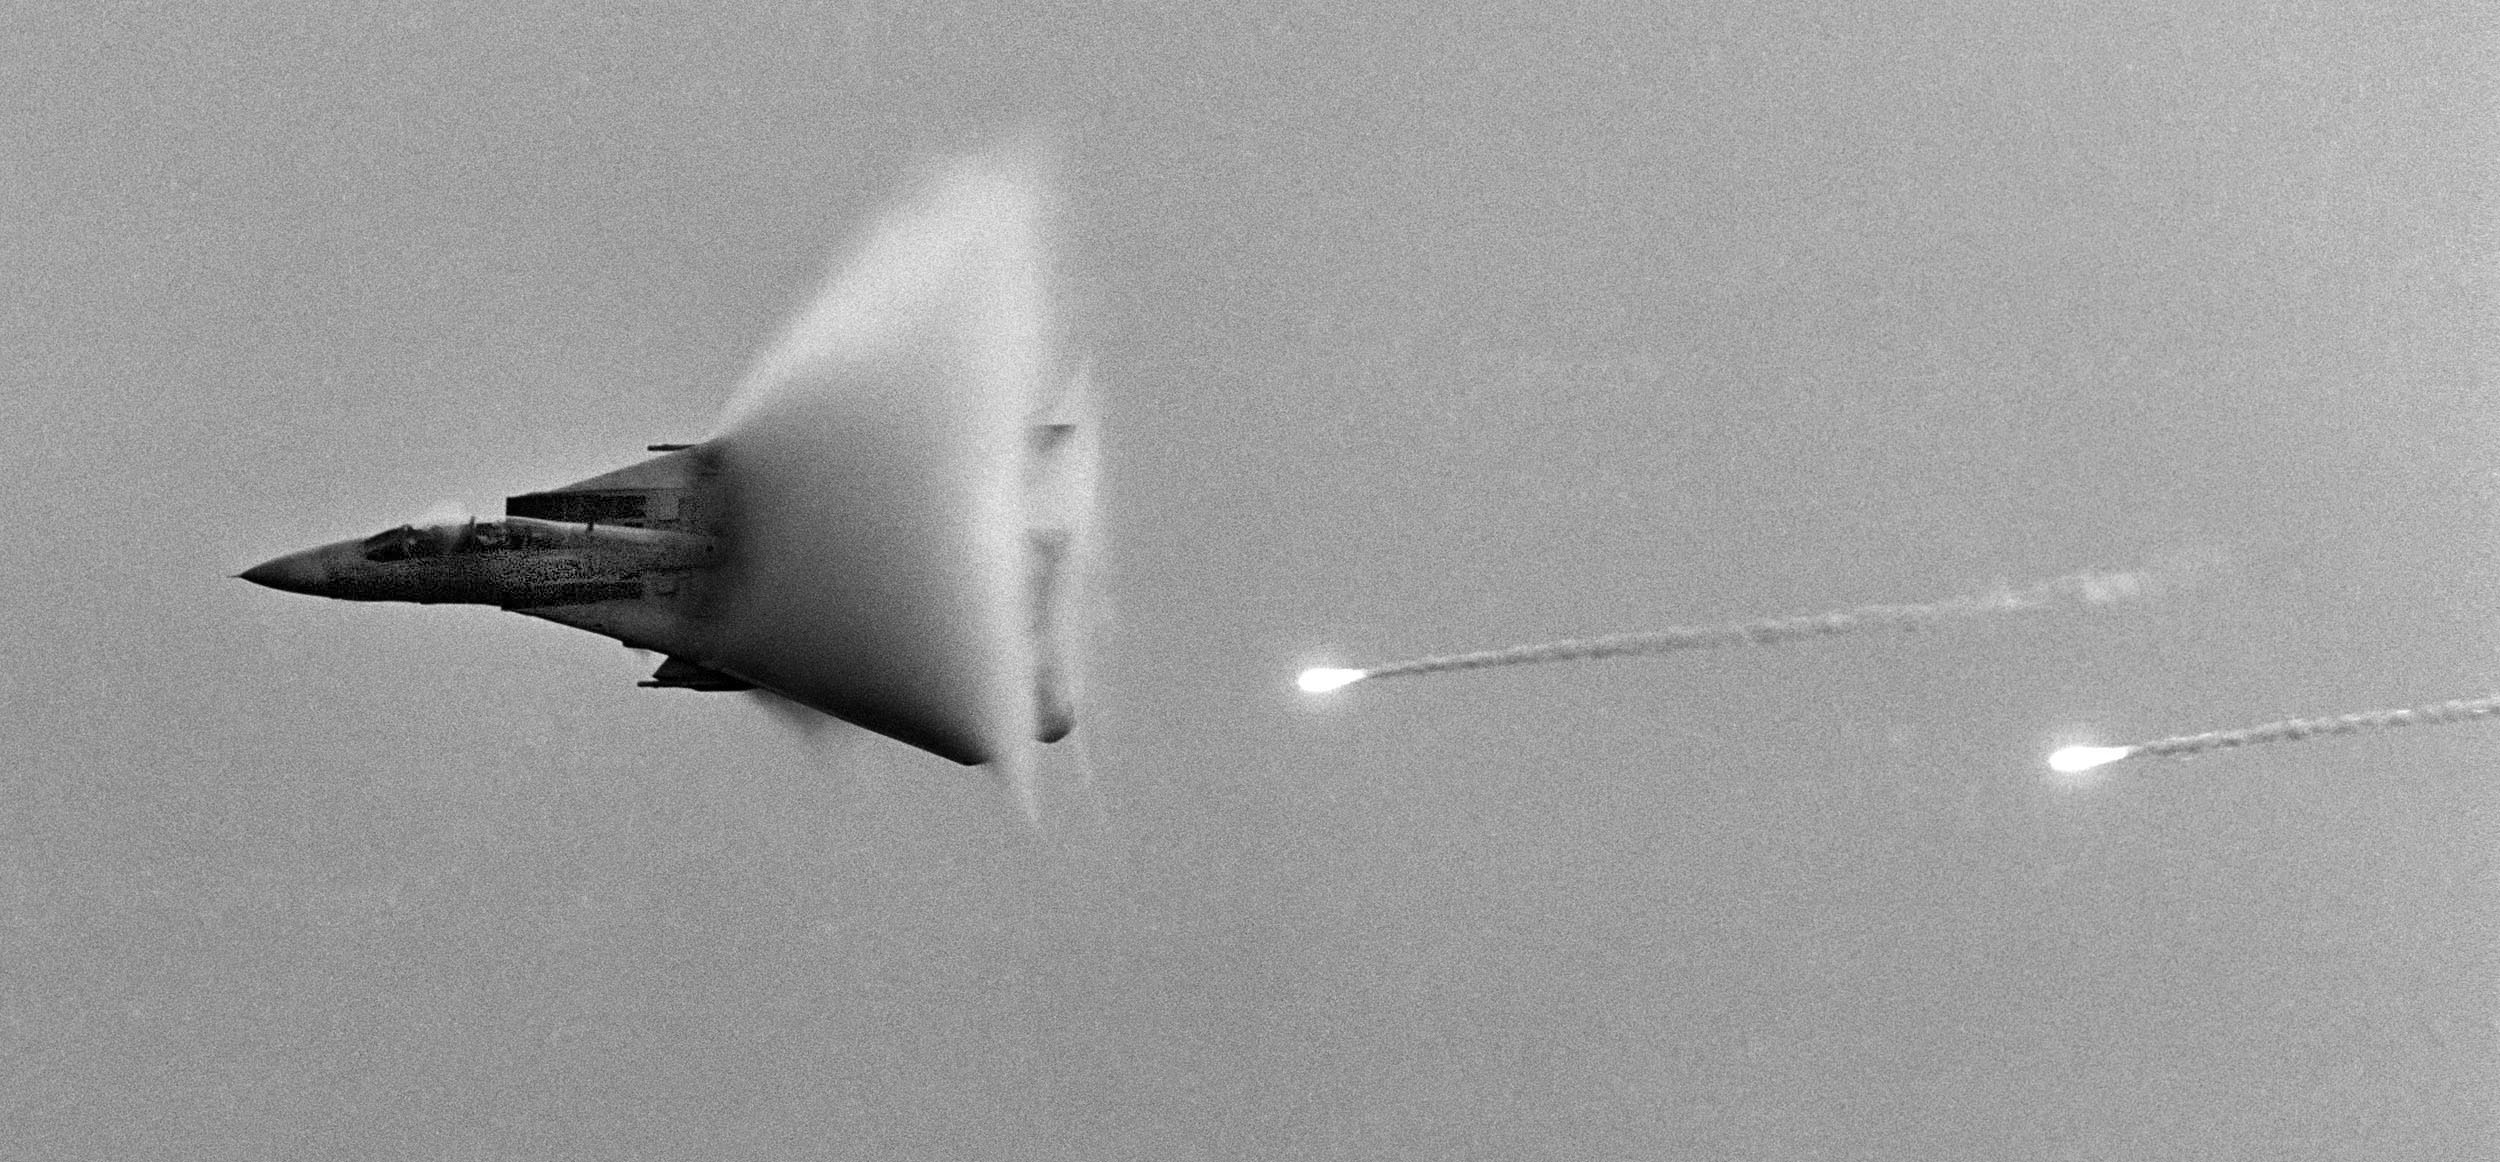 SONIC BOOM

A jet fighter drops flares and breaks the sound barrier as it flies by the U.S. aircraft carrier John F. Kennedy in the Arabian Sea off the coast of Pakistan. The carrier was conducting combat operations into Afghanistan.